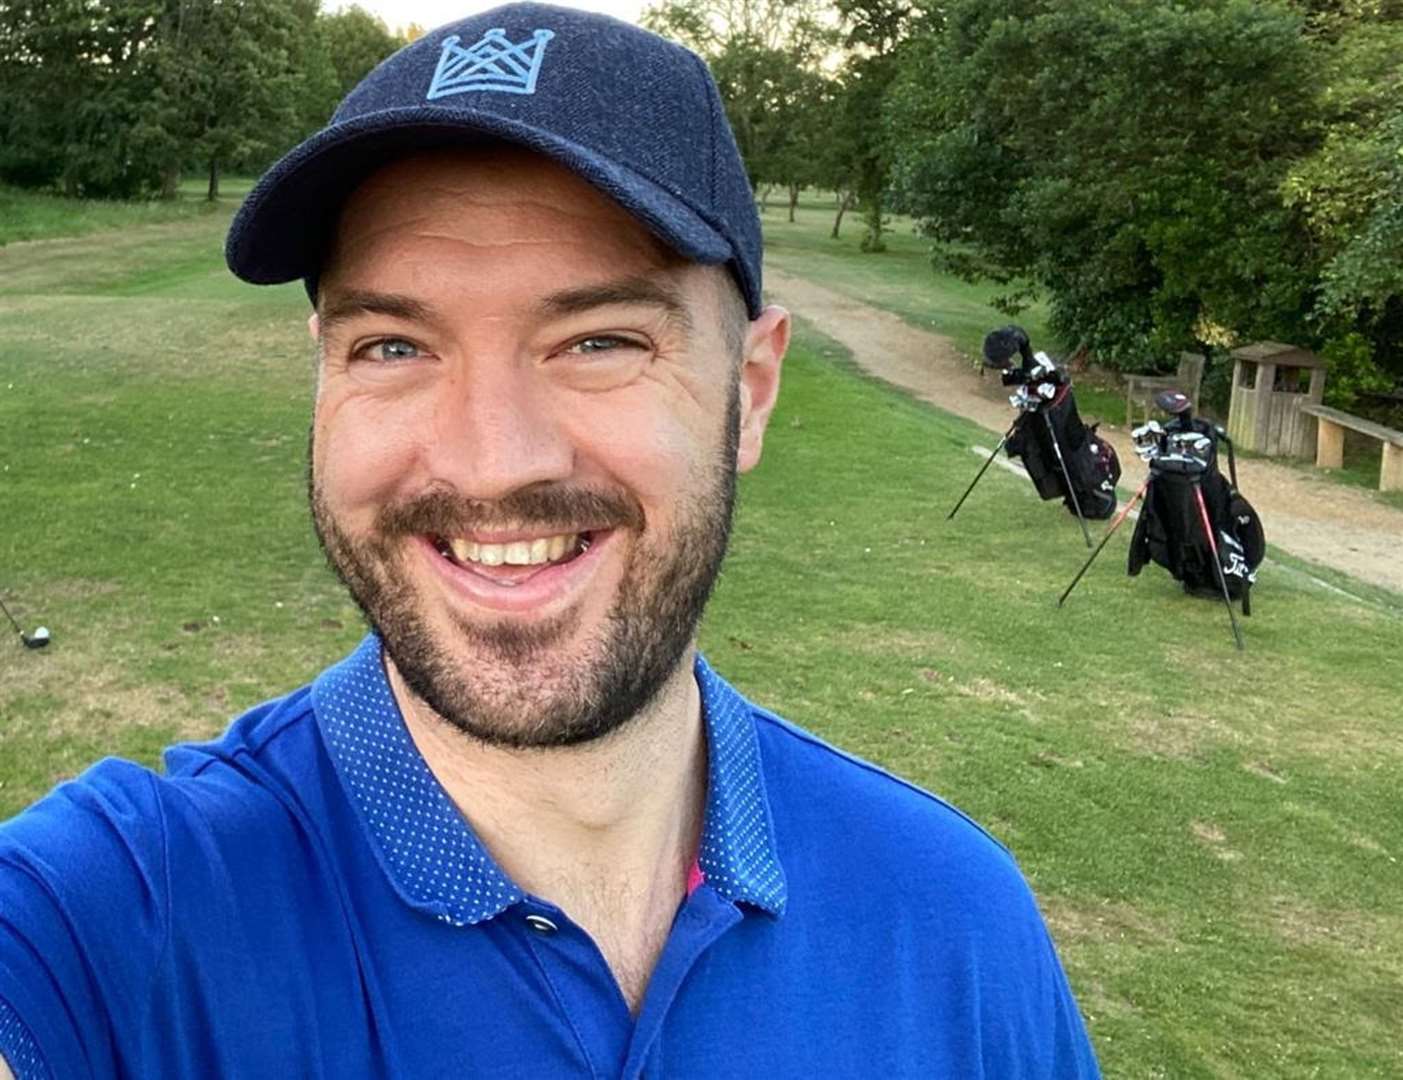 Ben Sherreard has launched a new golf business